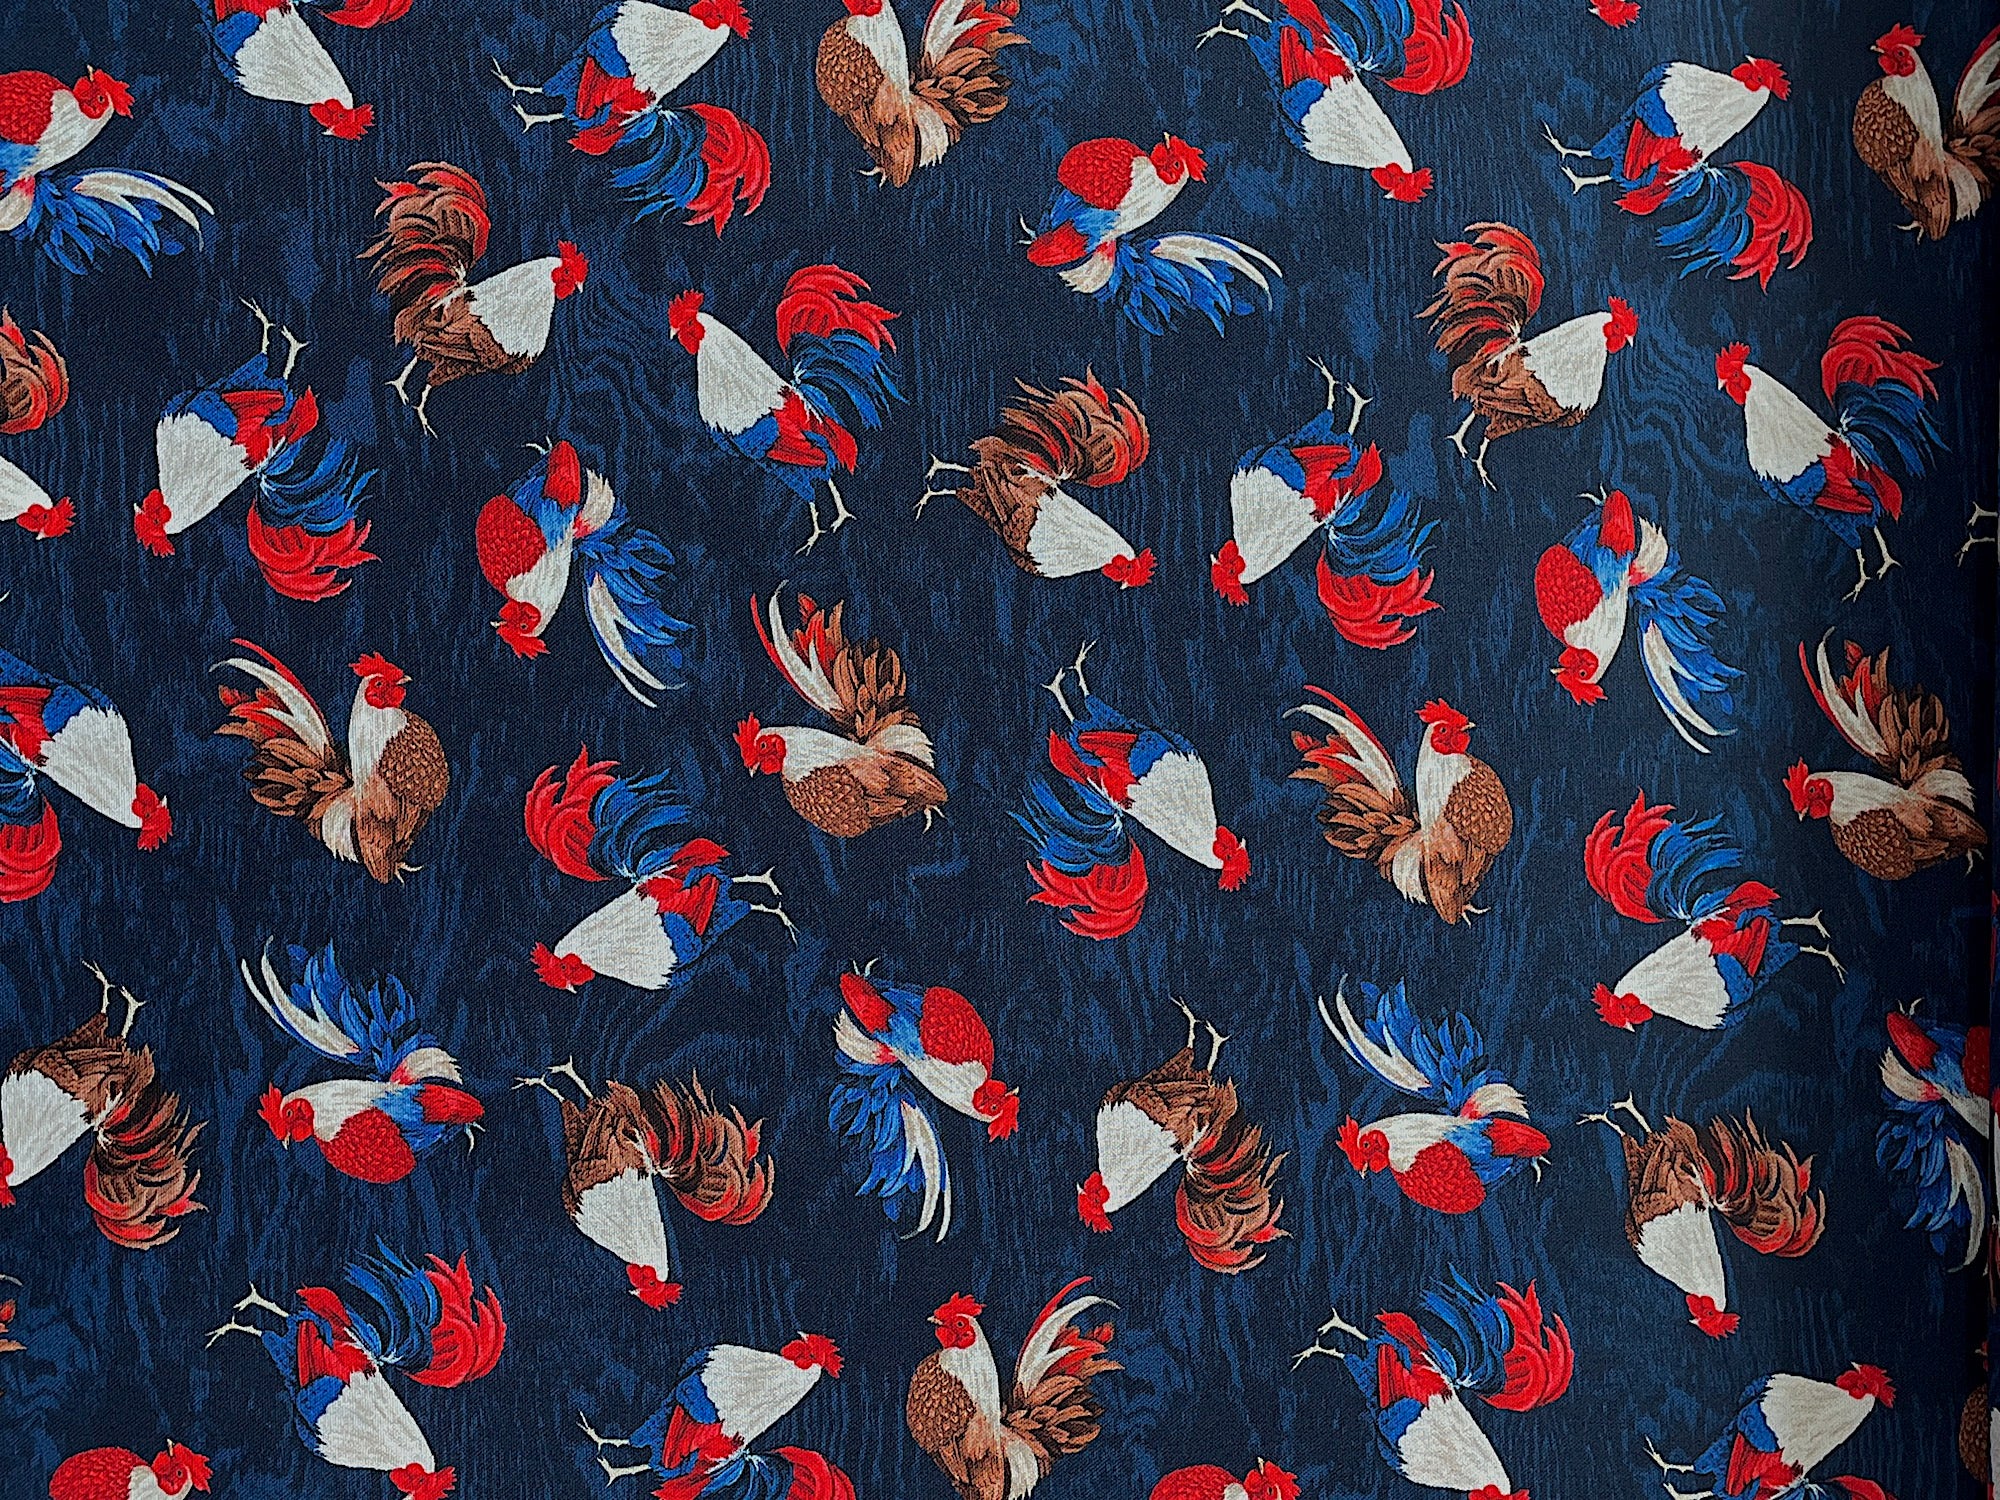 Cotton fabric covered with red, white, blue and brown roosters.